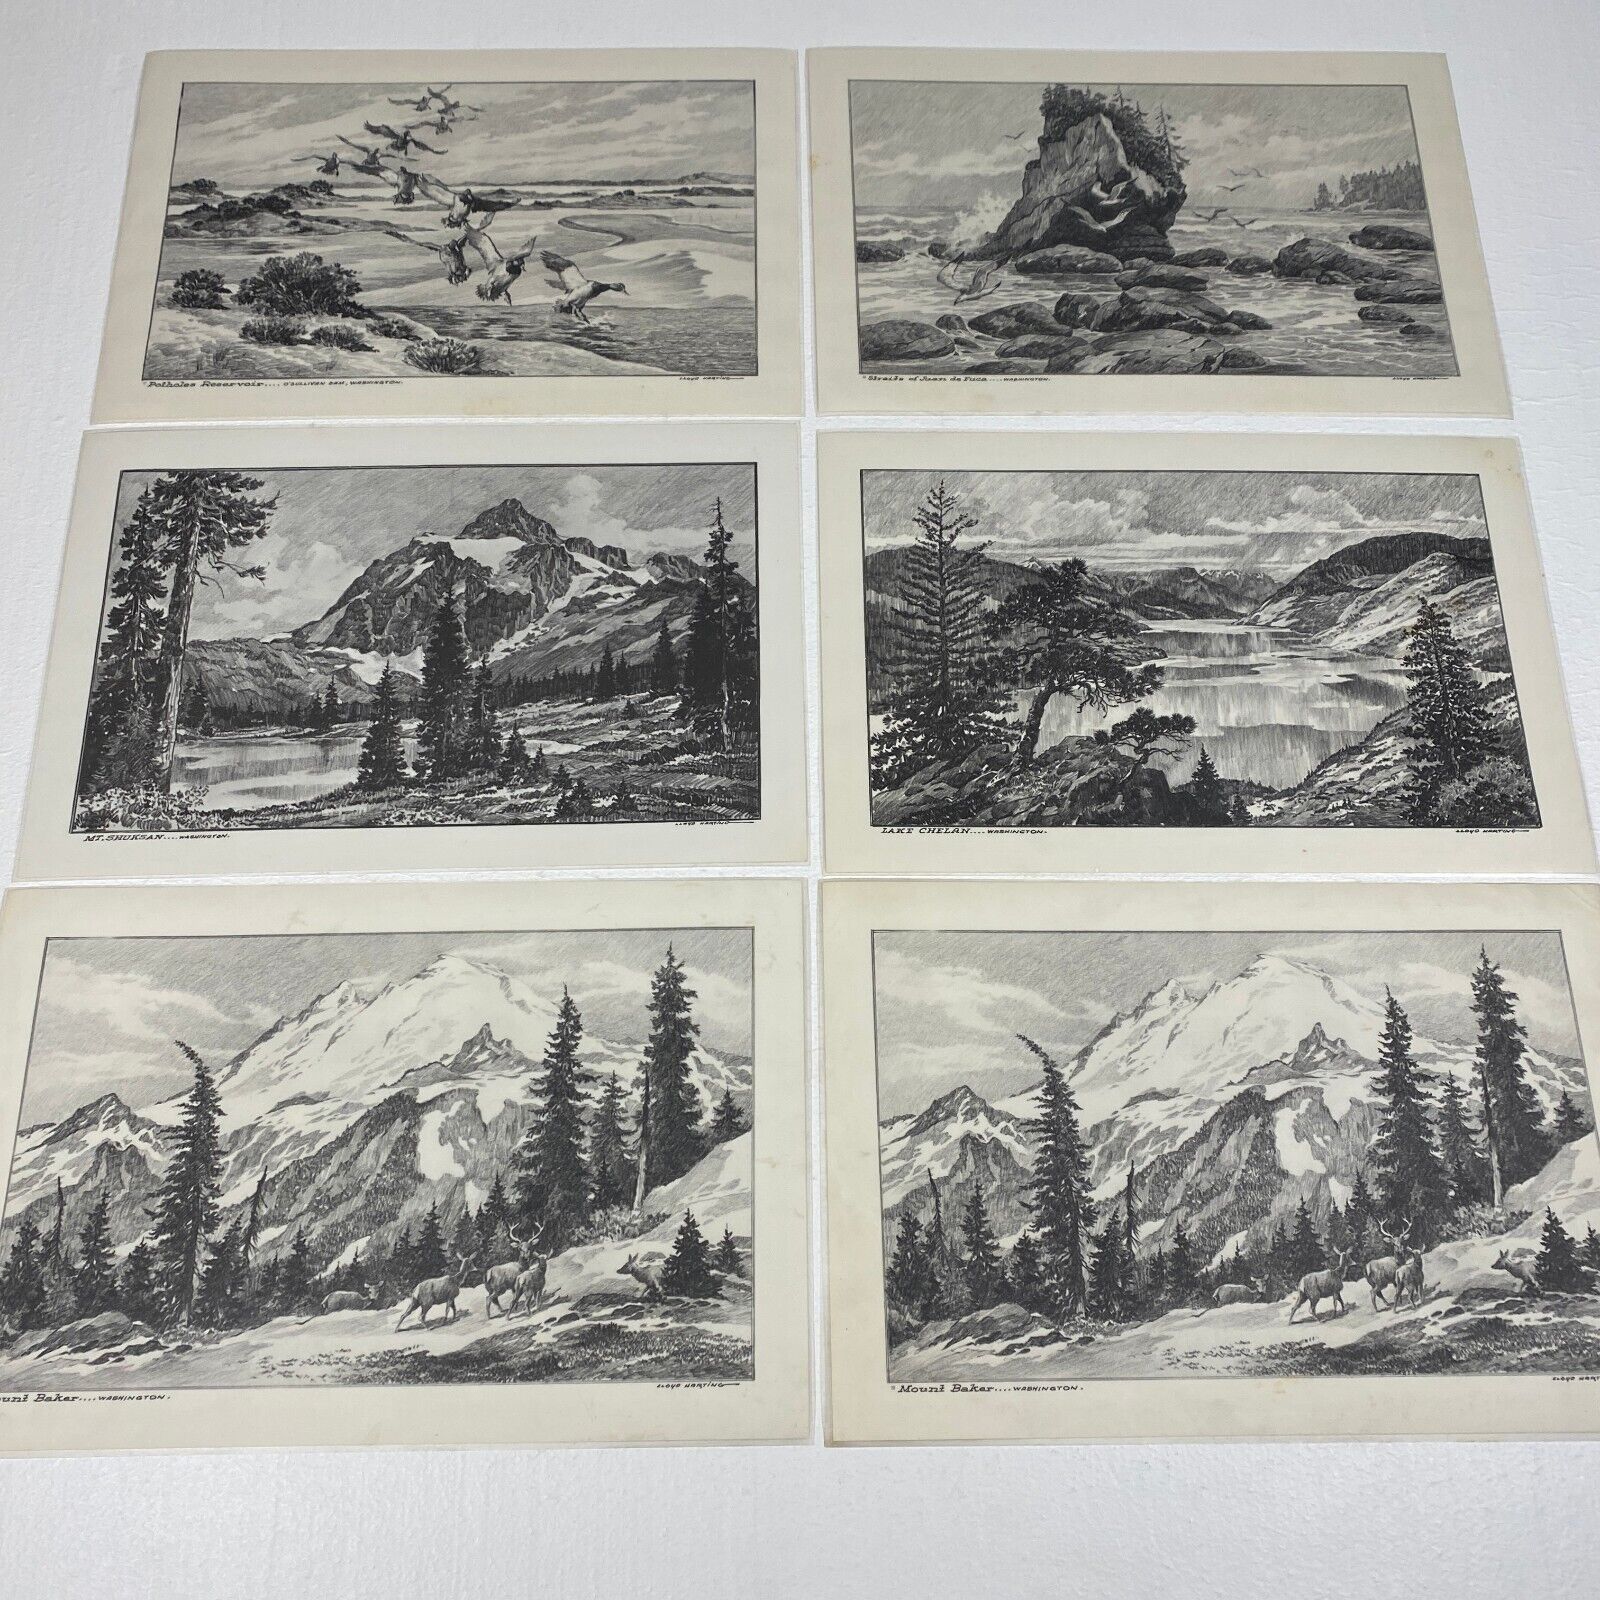 Lloyd Harting Art Sketch Placemat Collection Wa. State 6 Mats Cabin Art Nature